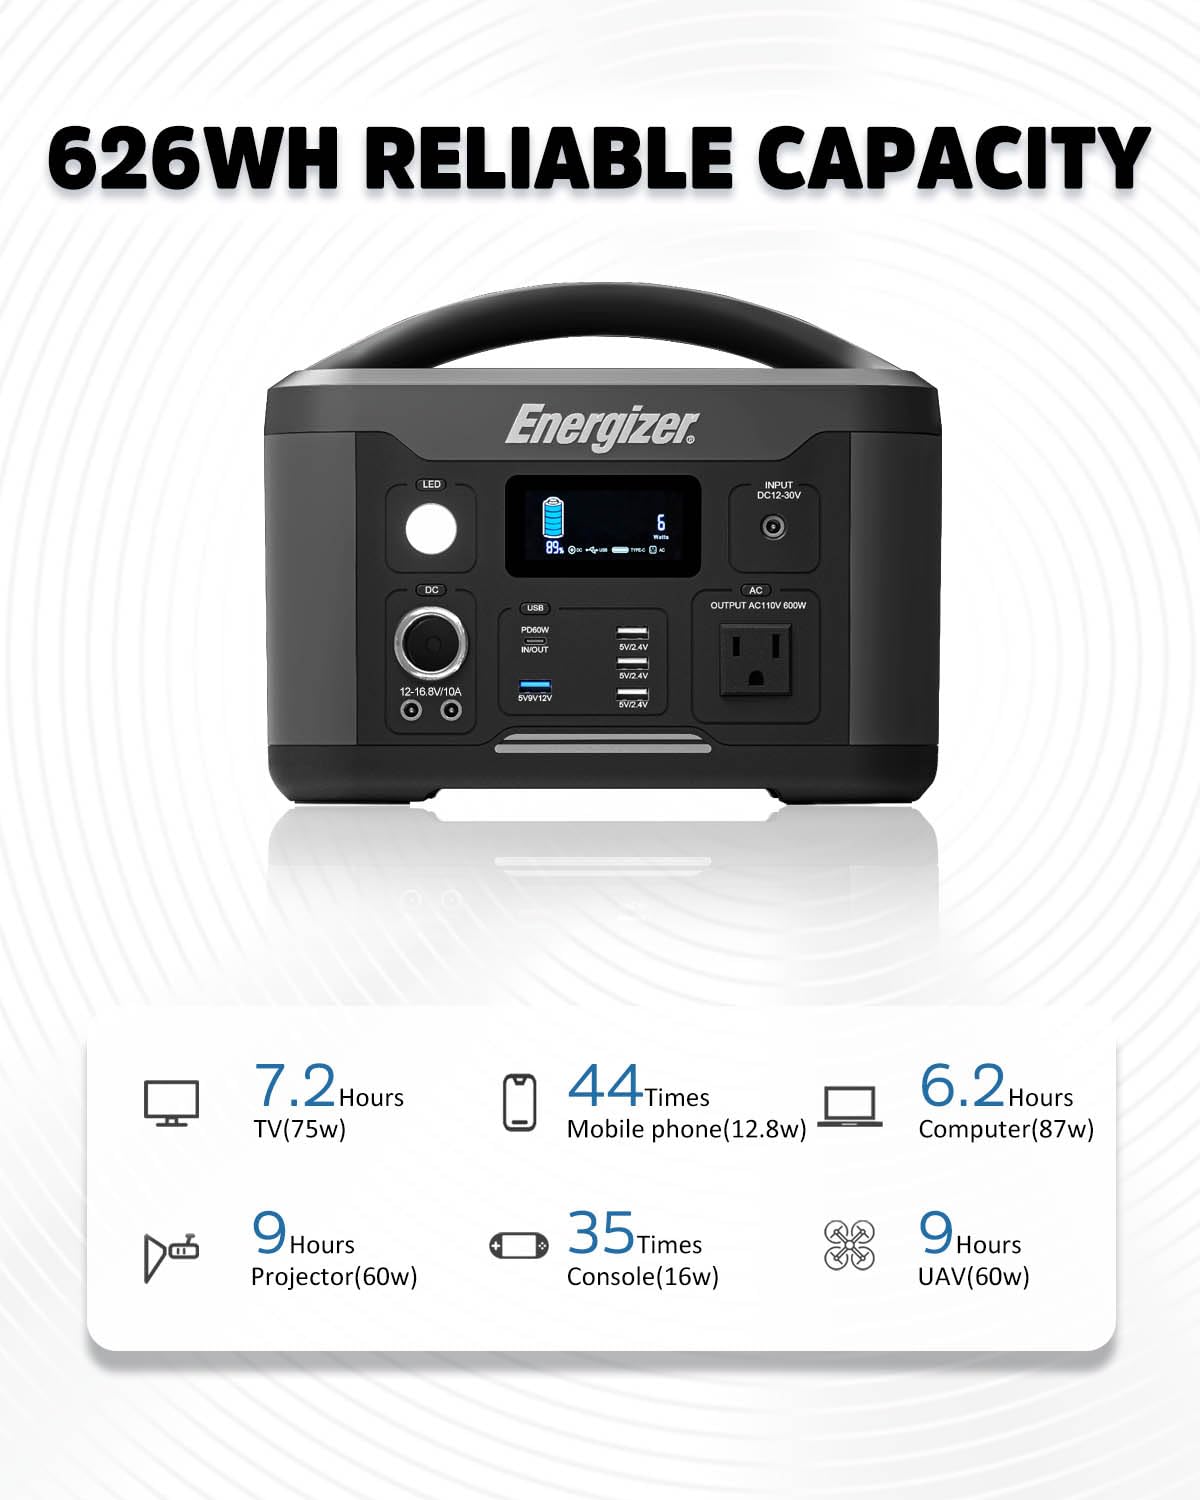 Energizer Portable Power Station PPS700 626Wh Battery 110V/600W Backup Lithium Battery, 110V/600W Pure Sine Wave AC Outlet, Solar Generator for Outdoors Camping Travel Hunting Blackout